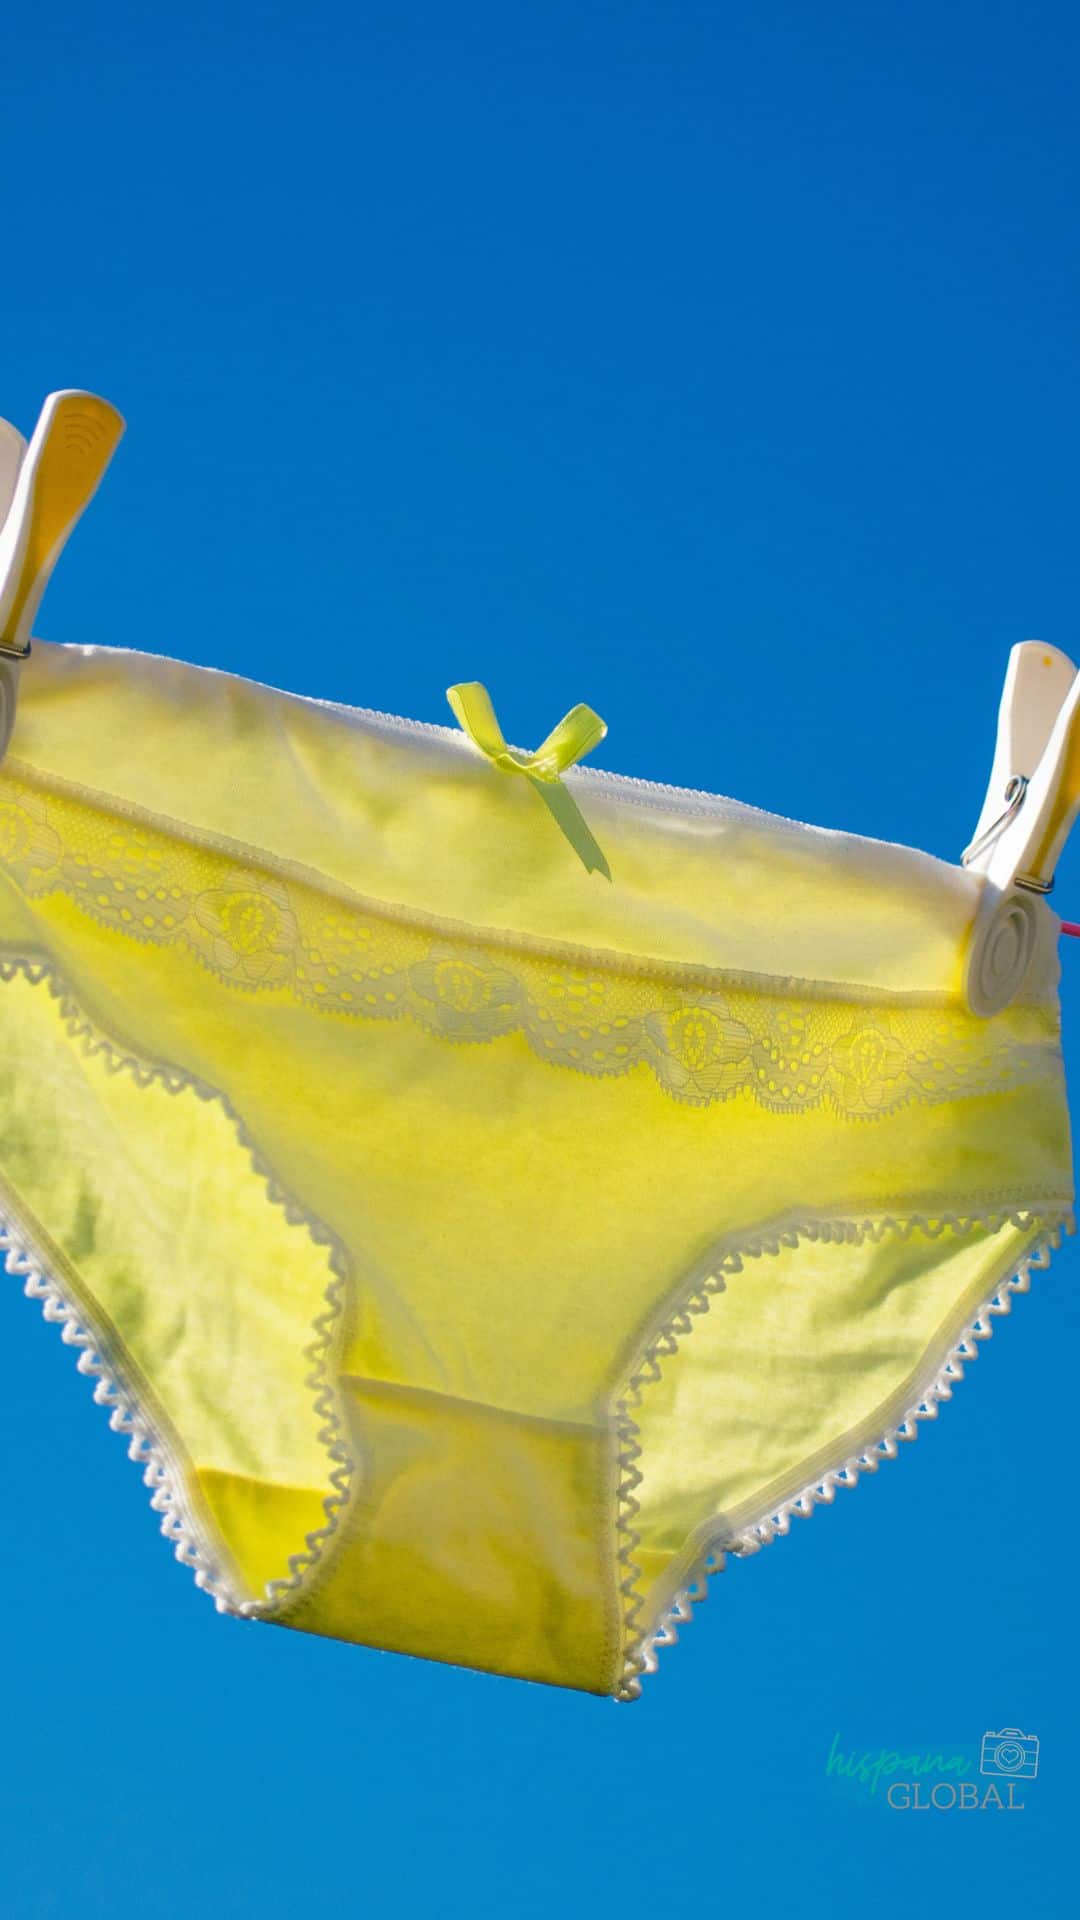 New Years traditions and what the color of your underwear says